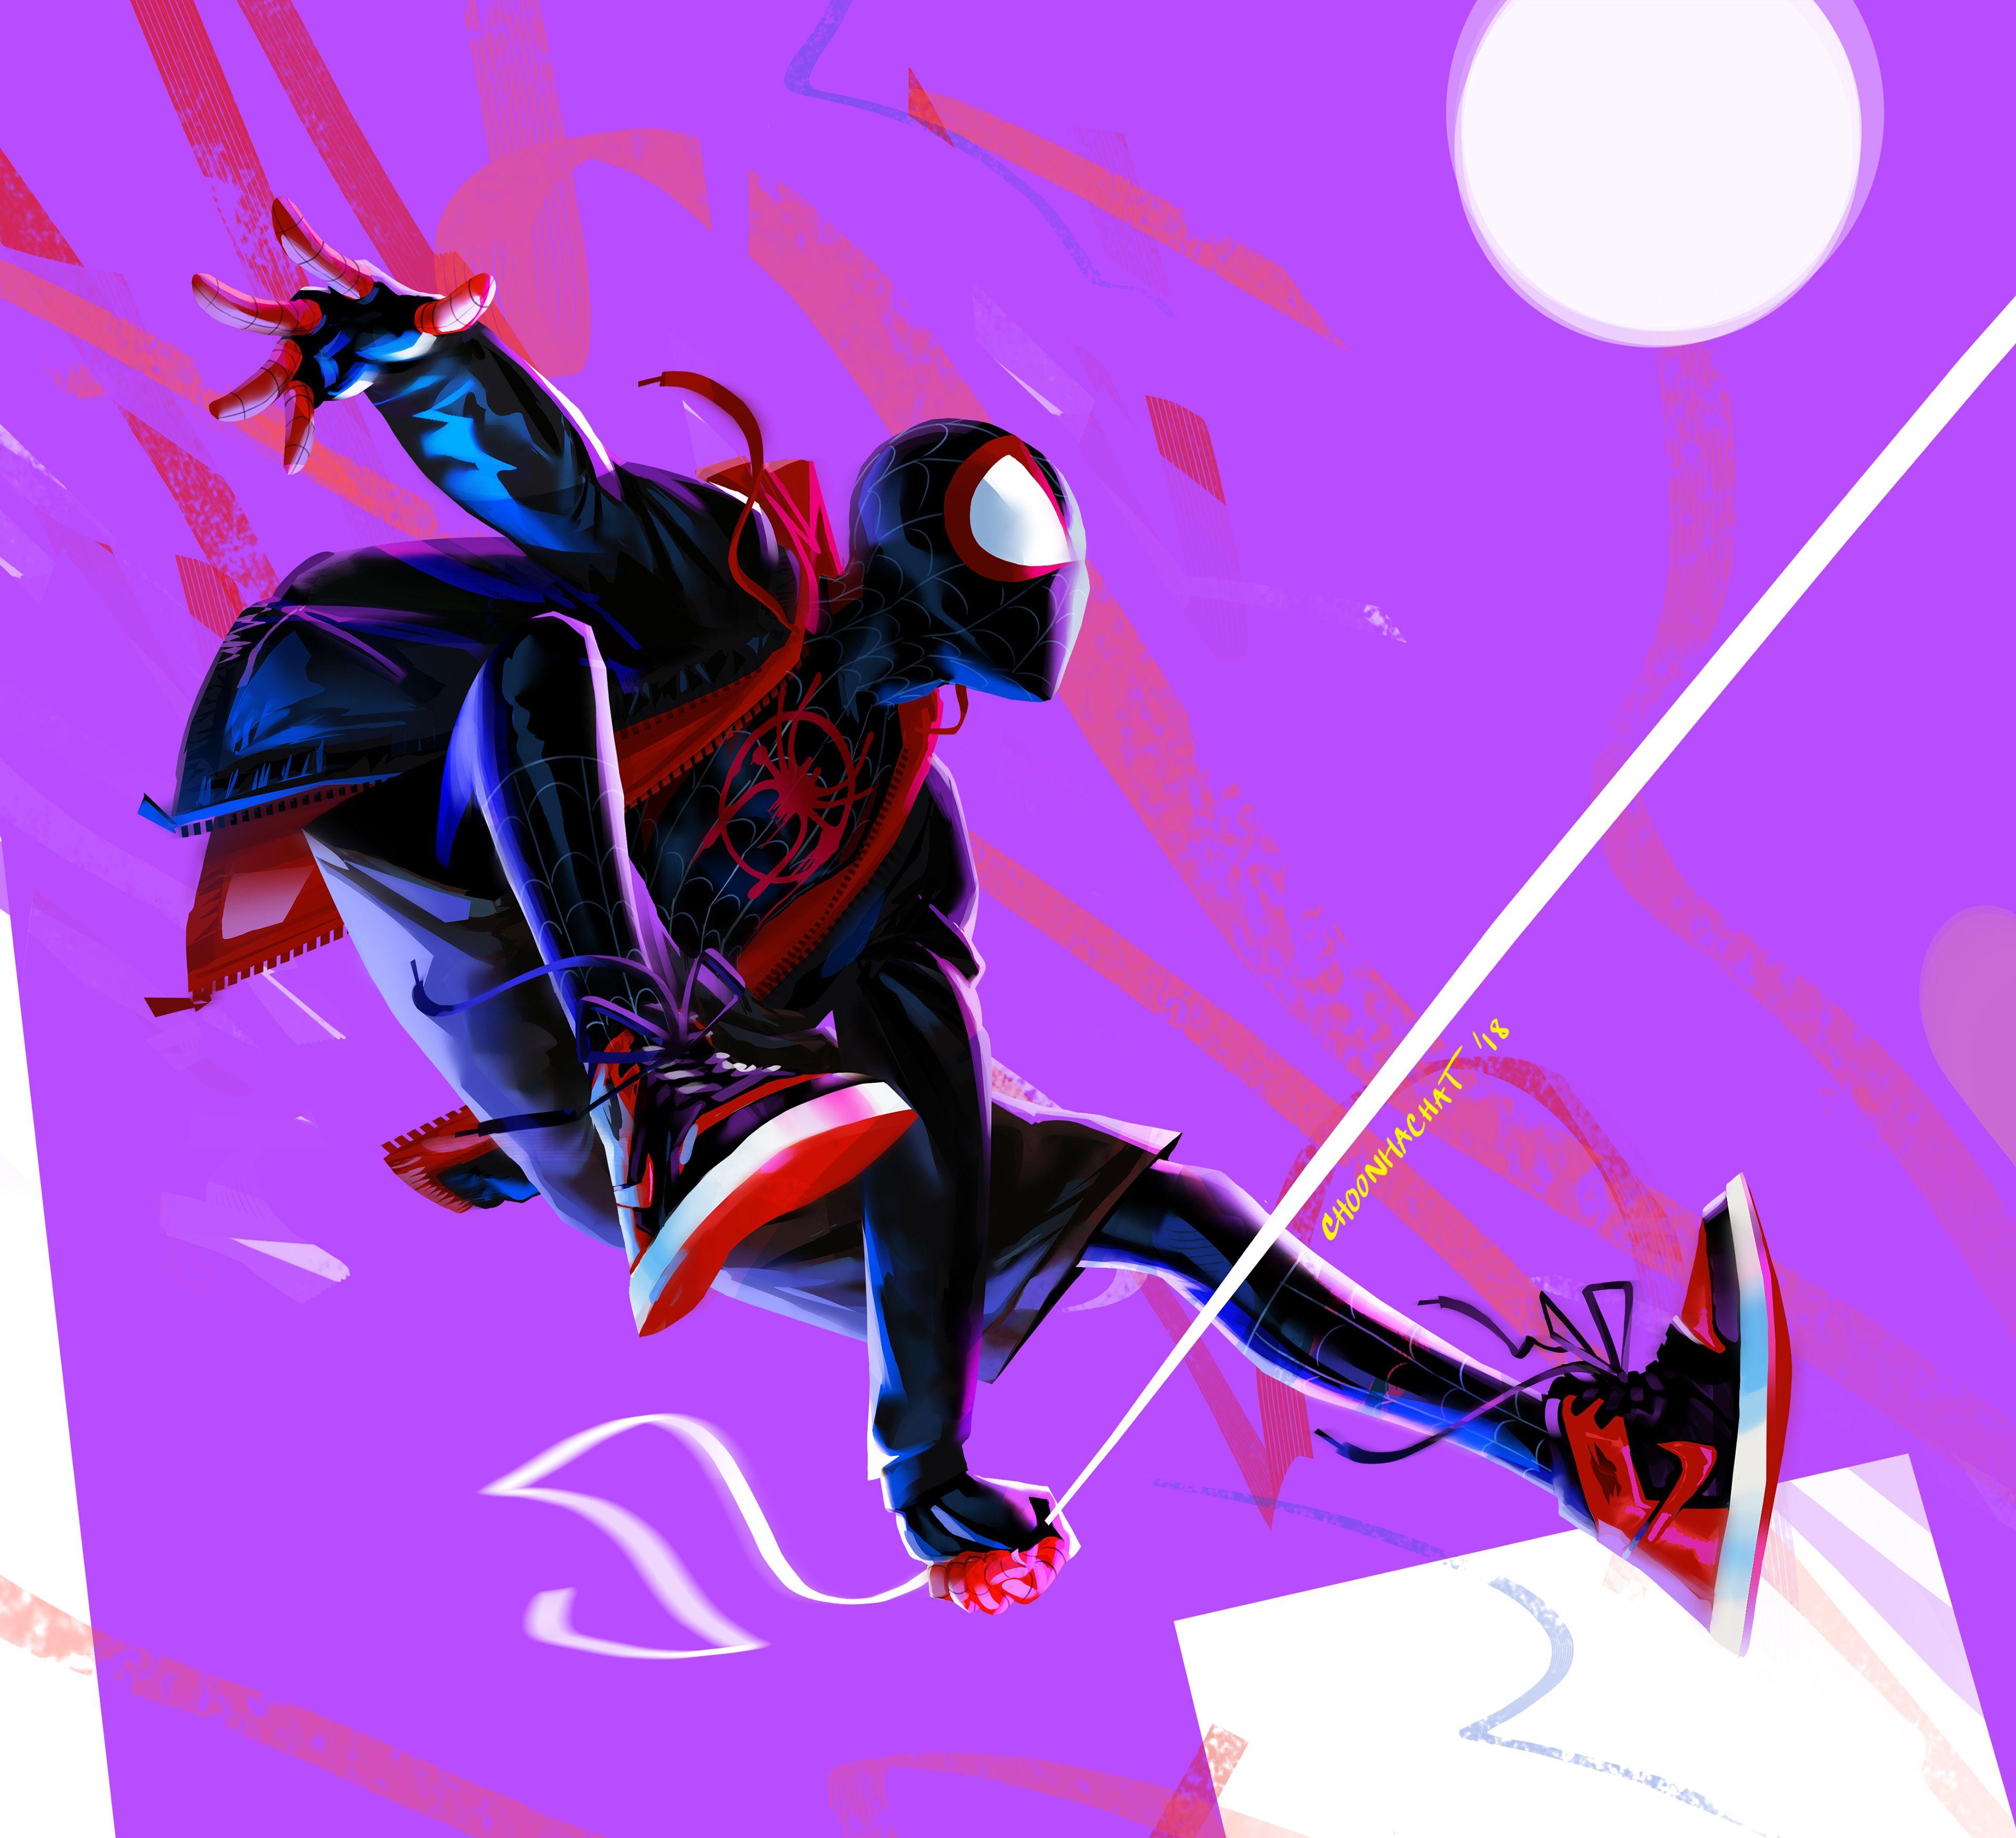 Wallpaper Miles Morales, Spider Man: Into The Spider Verse, HD, 4K, Creative Graphics,. Wallpaper For IPhone, Android, Mobile And Desktop